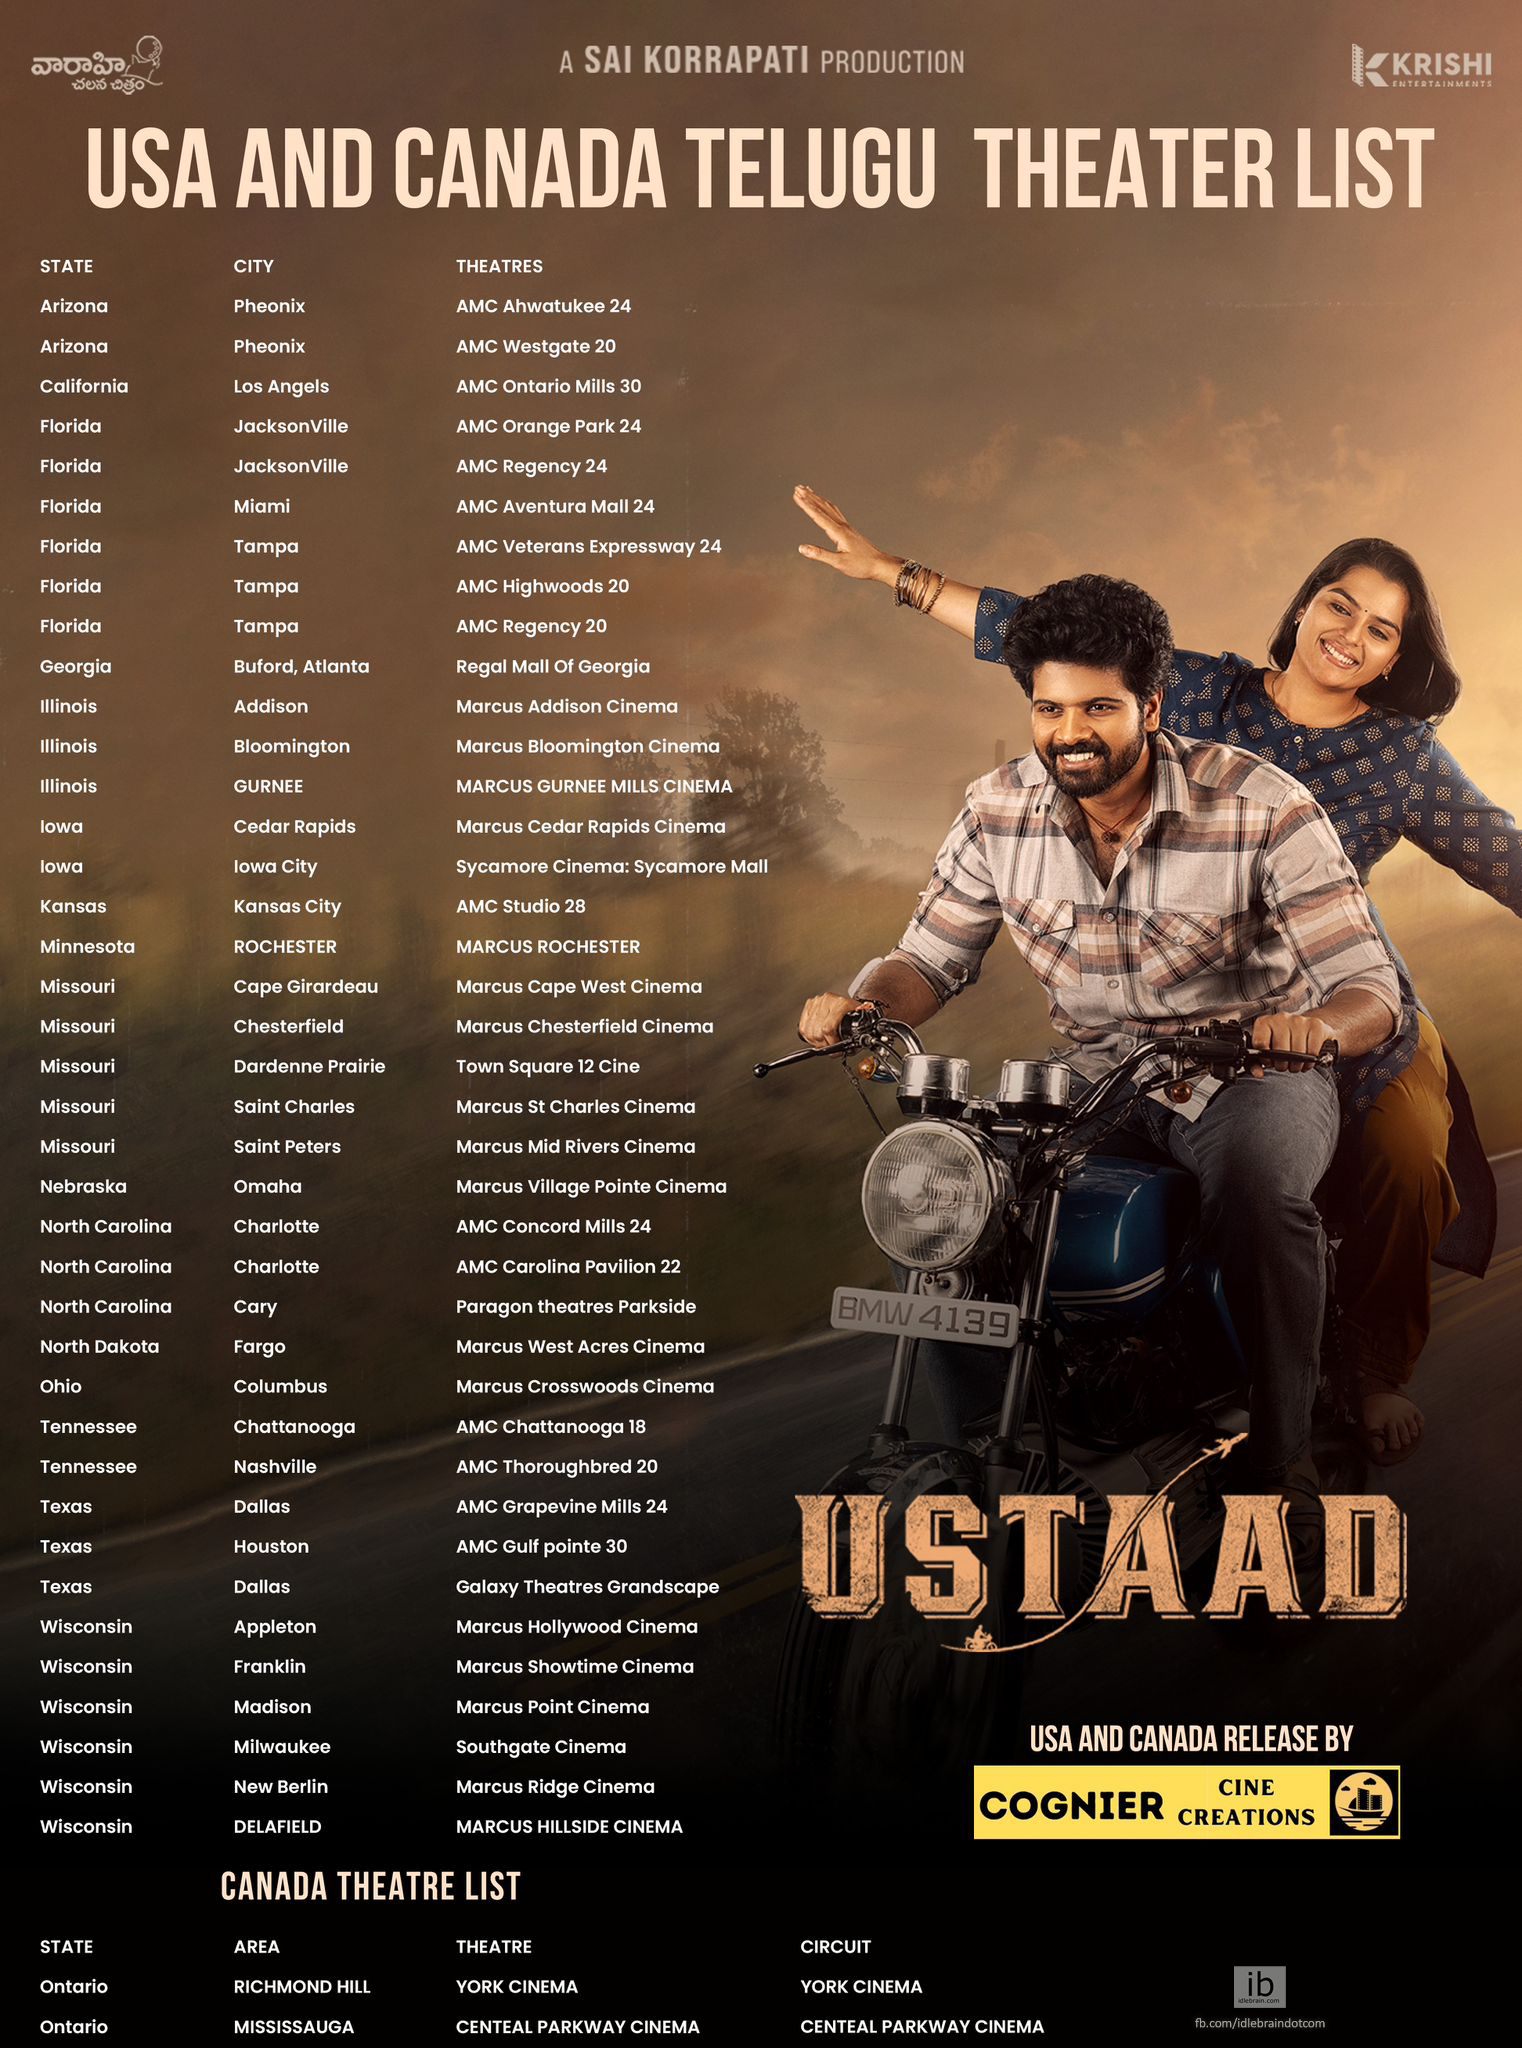 Ustaad USA theatrical release by COGNIER Cine Creations